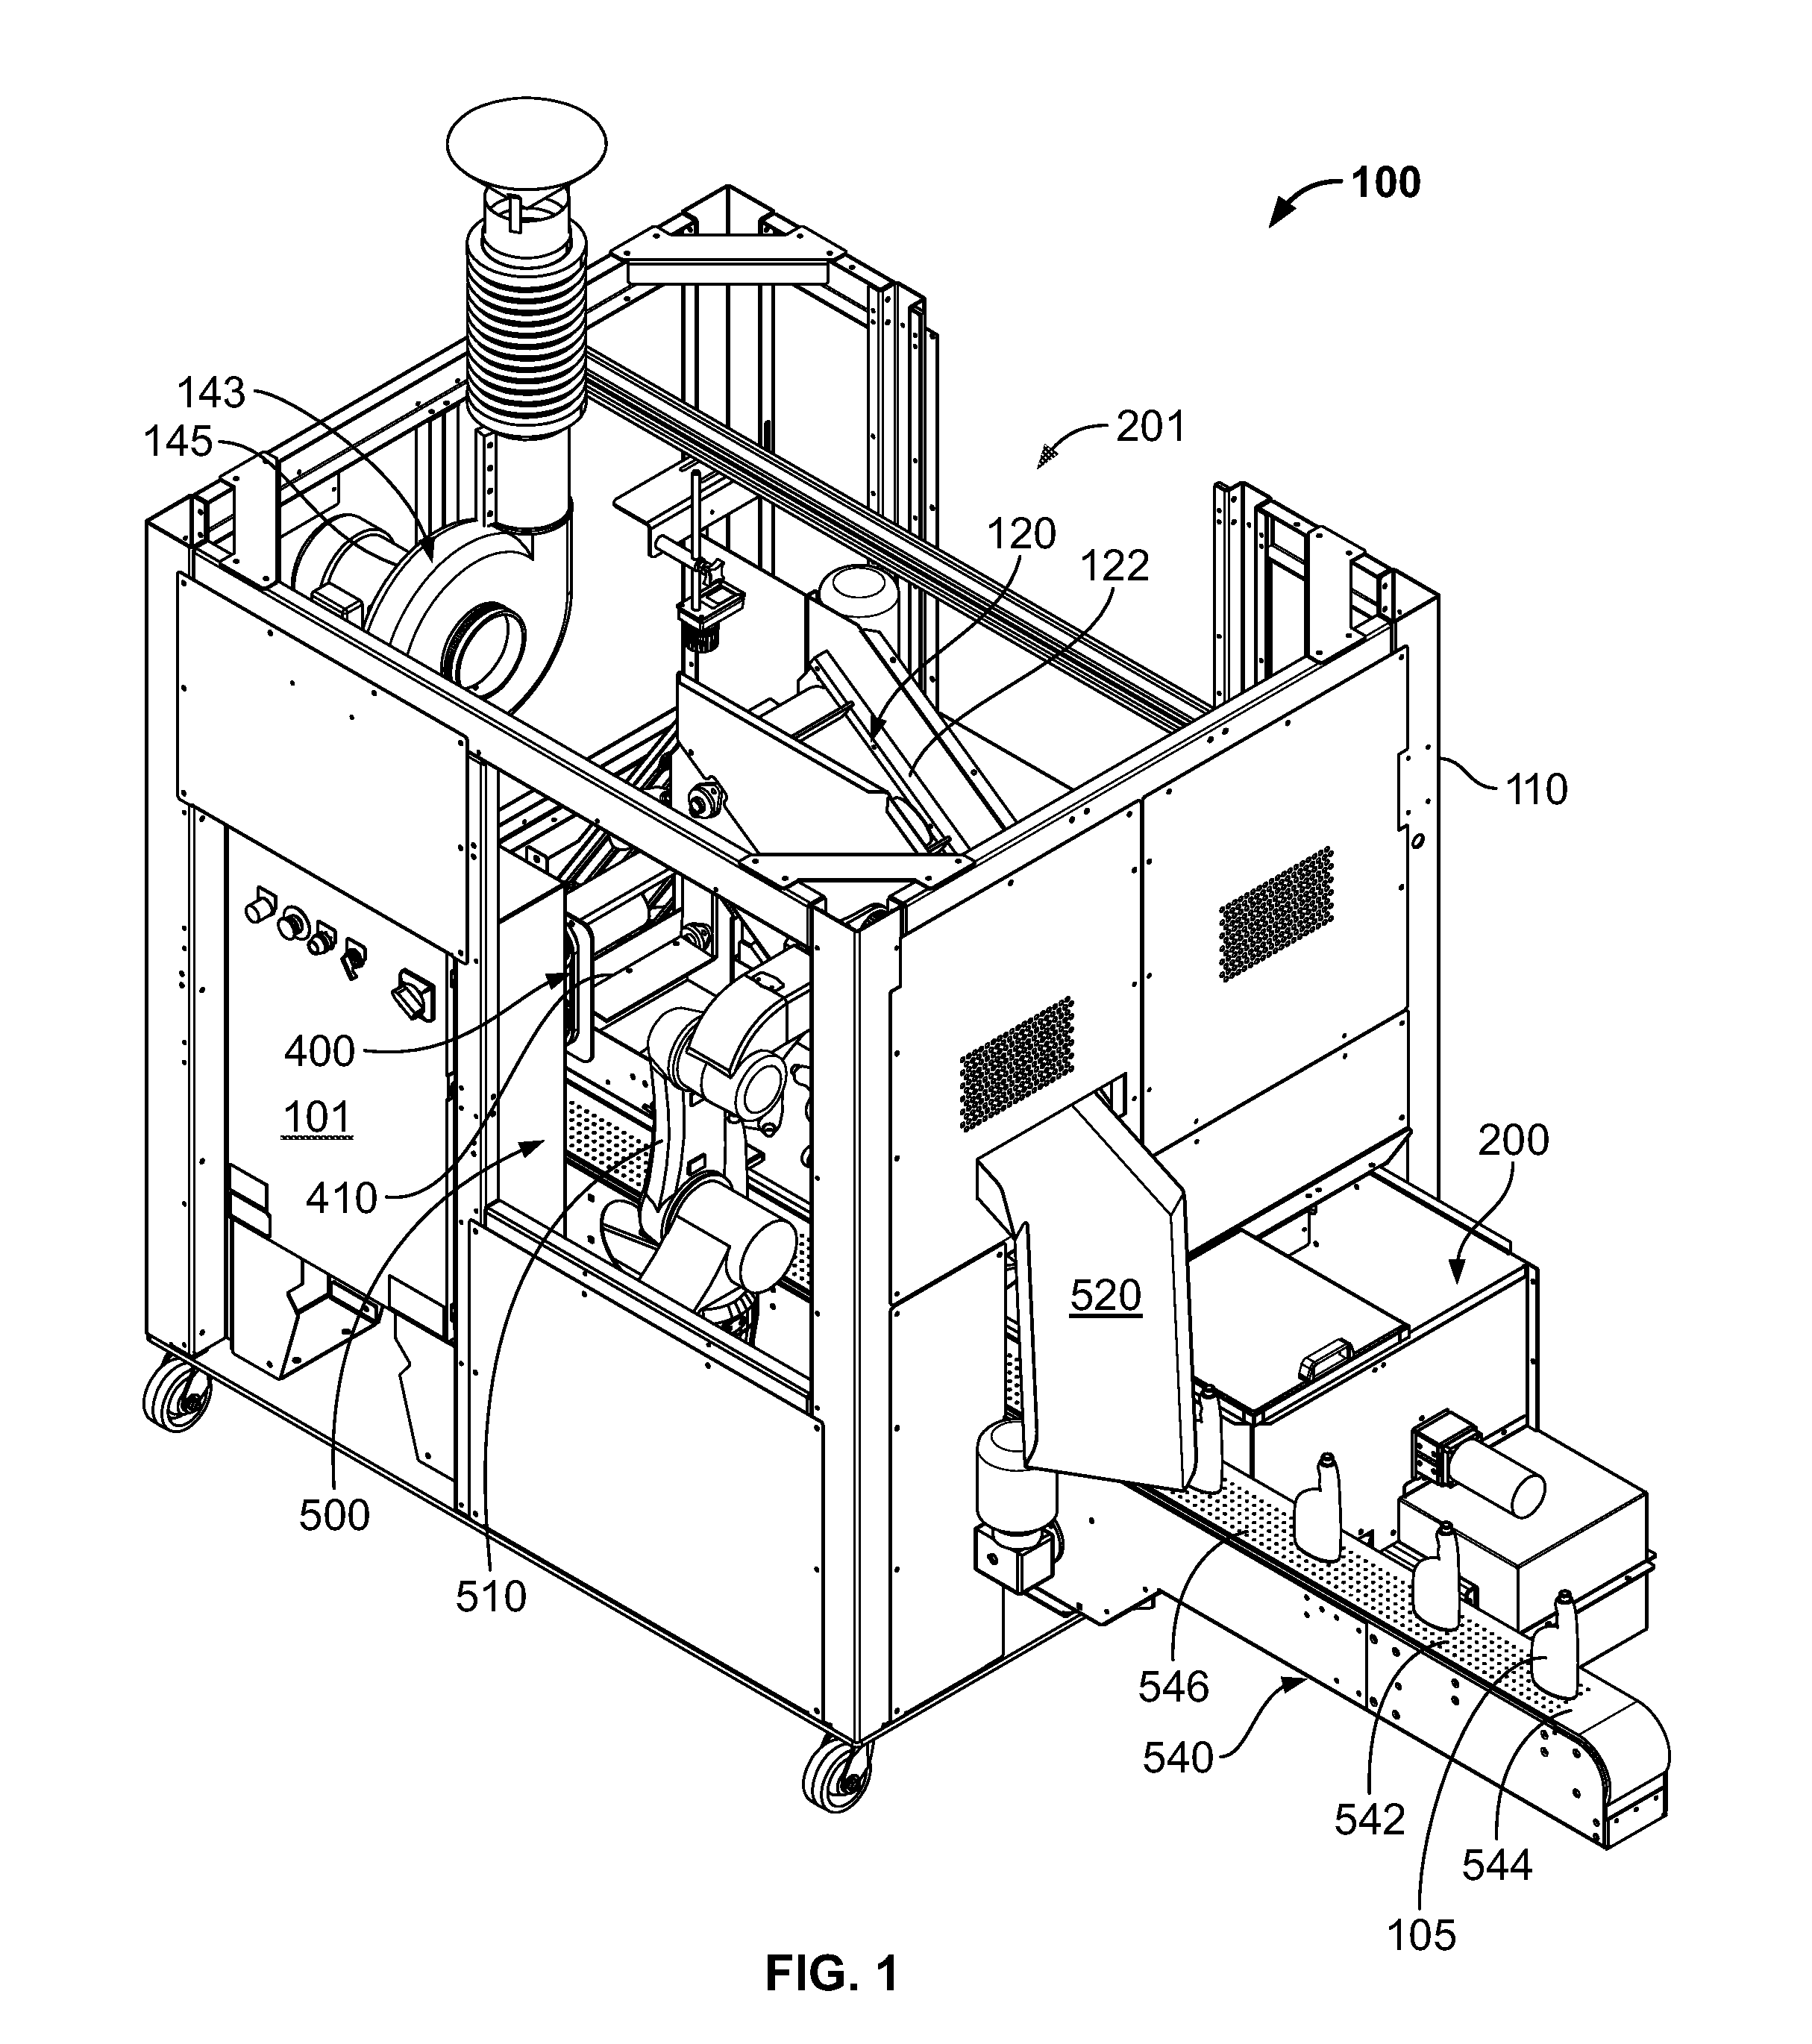 Apparatus and method for inspecting and orienting articles